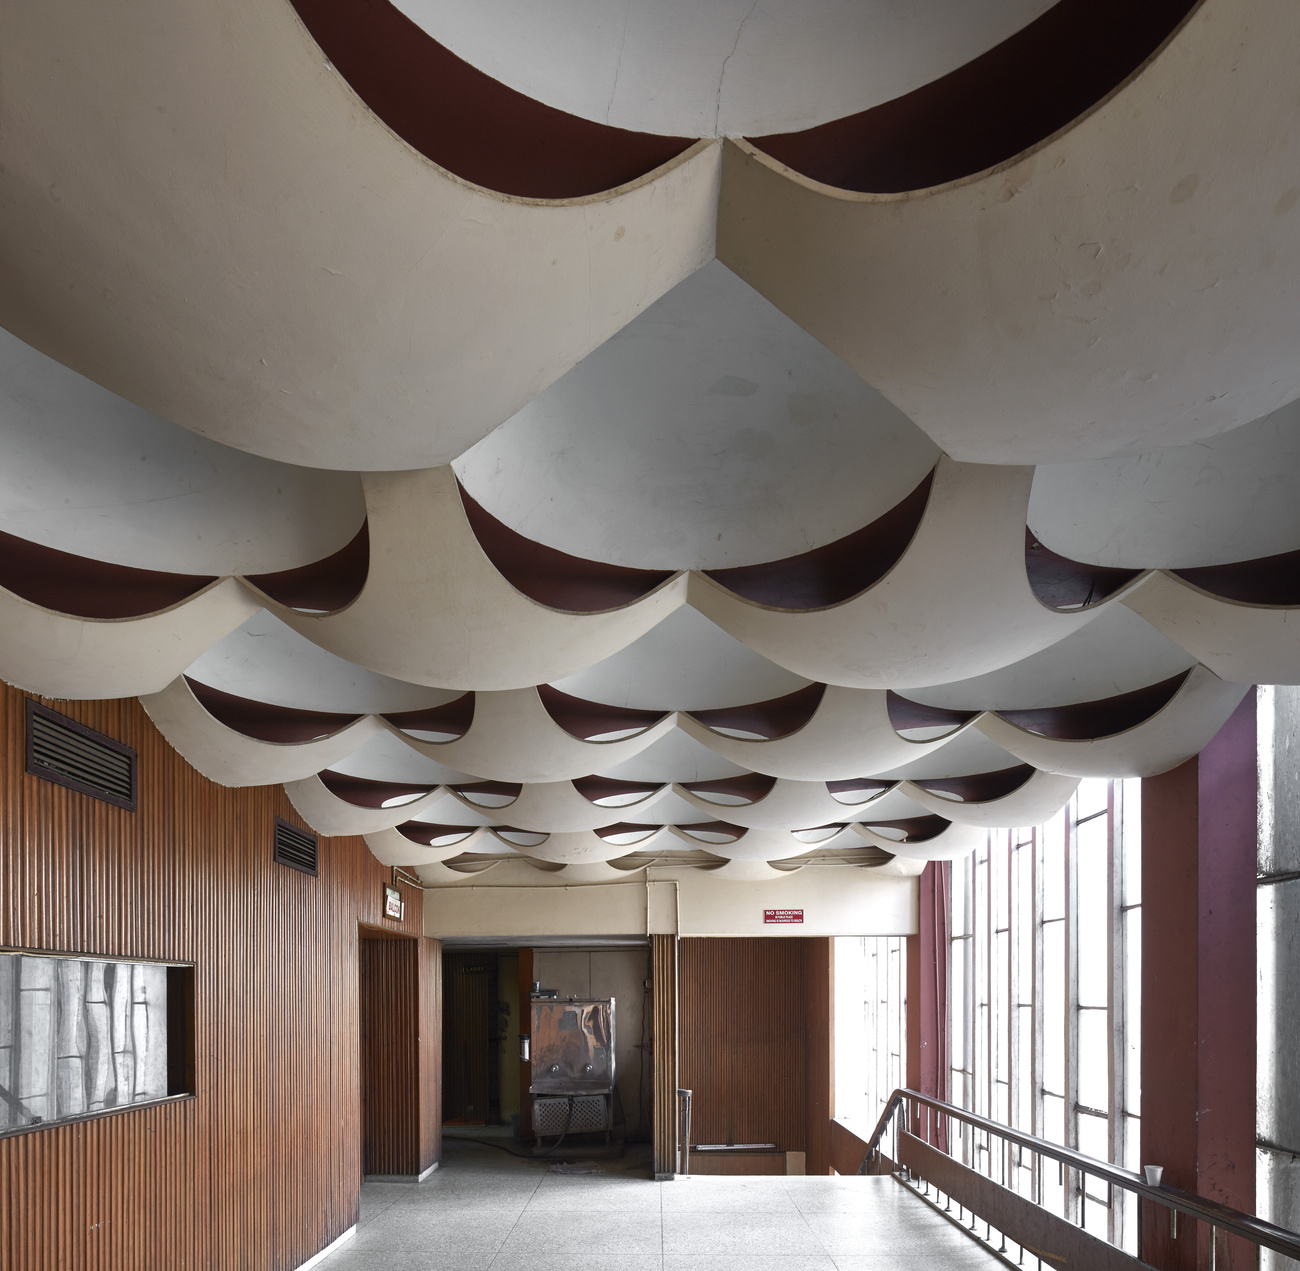 Elaborate ceiling of a cinema in Chandigarh, designed by Le Corbusier